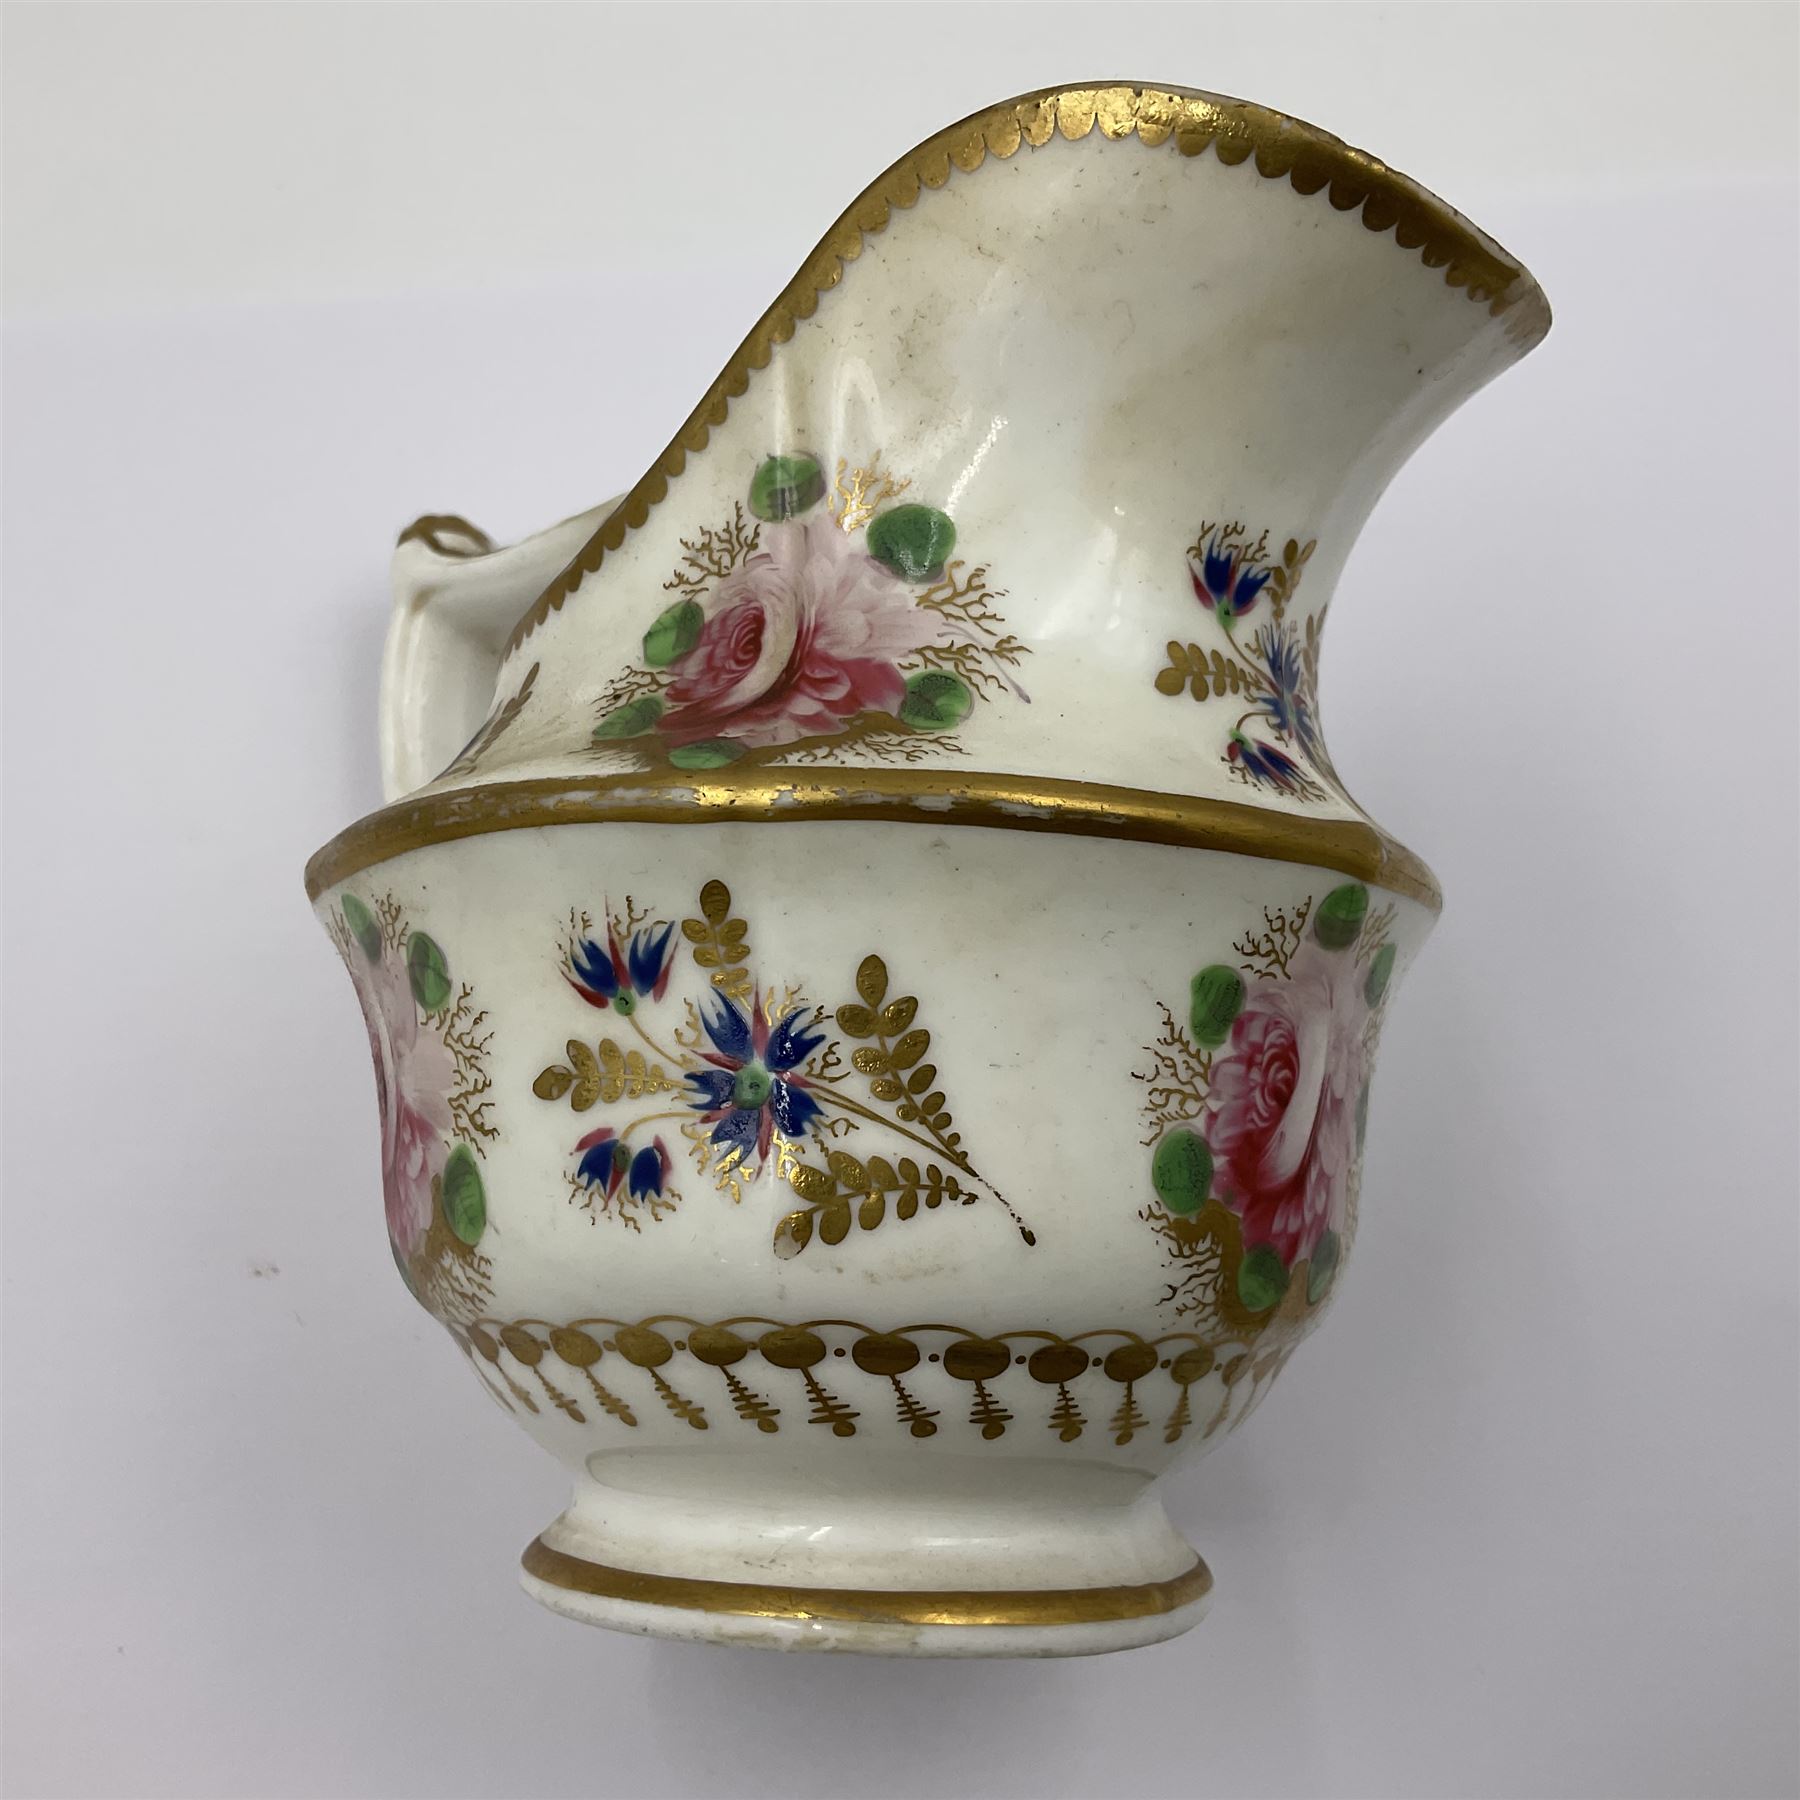 19th century Thomas Goode and Co jug - Image 19 of 22